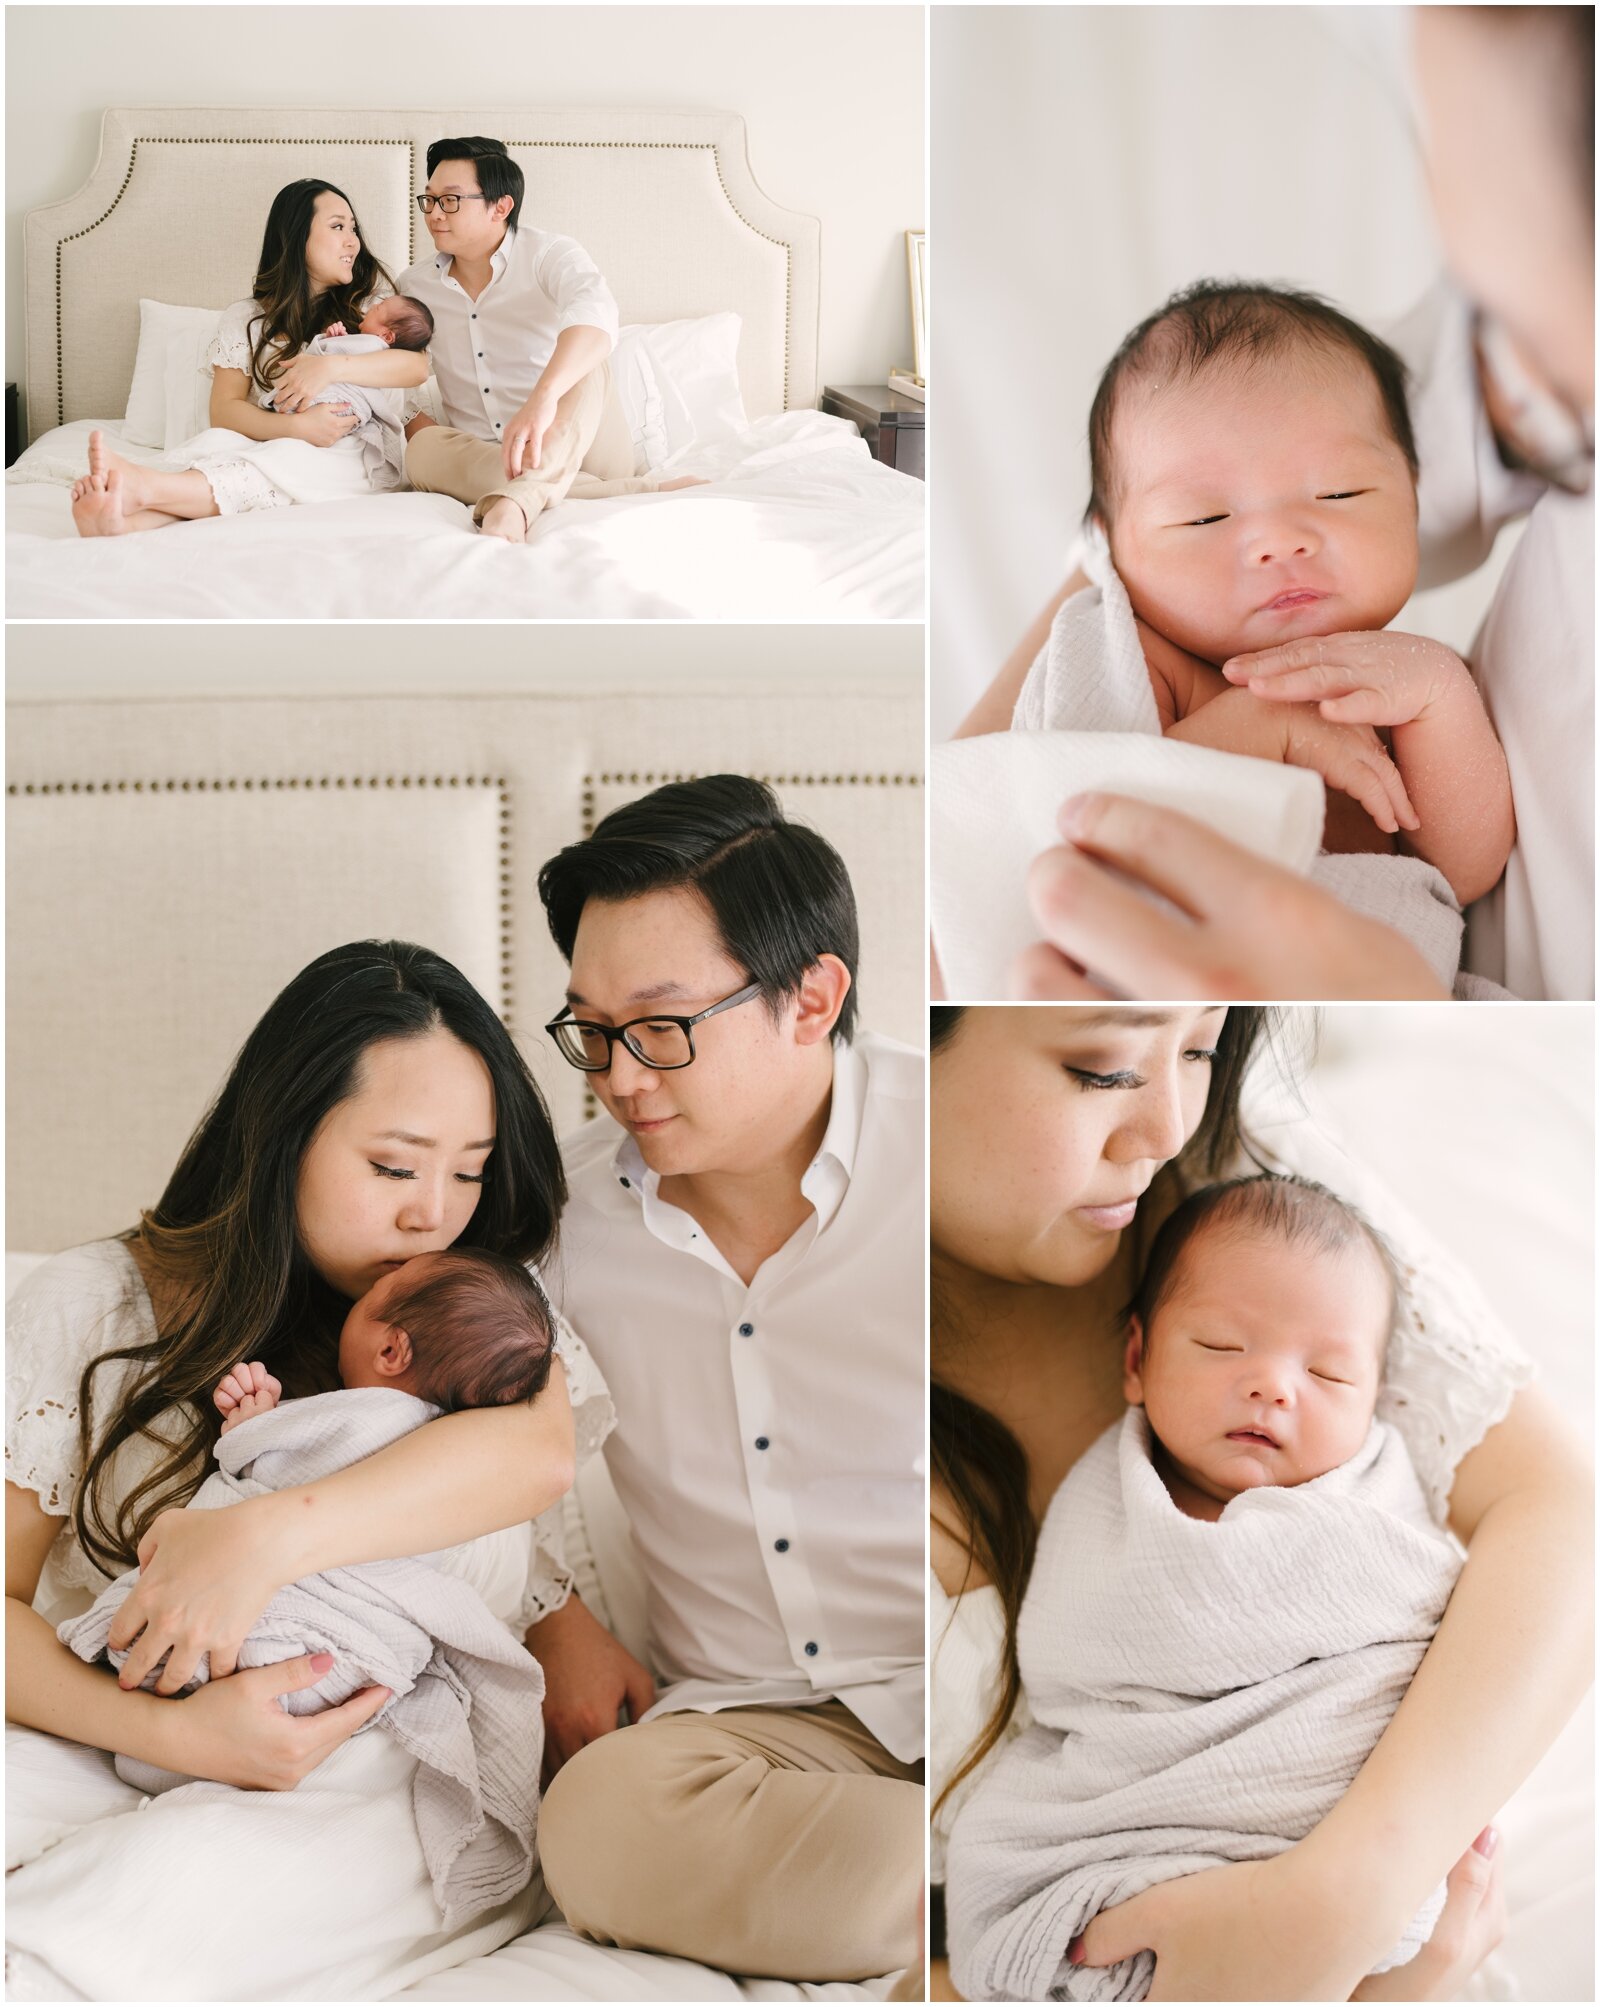  Newborn baby family photos at home. NKB Photo, New Jersey.  